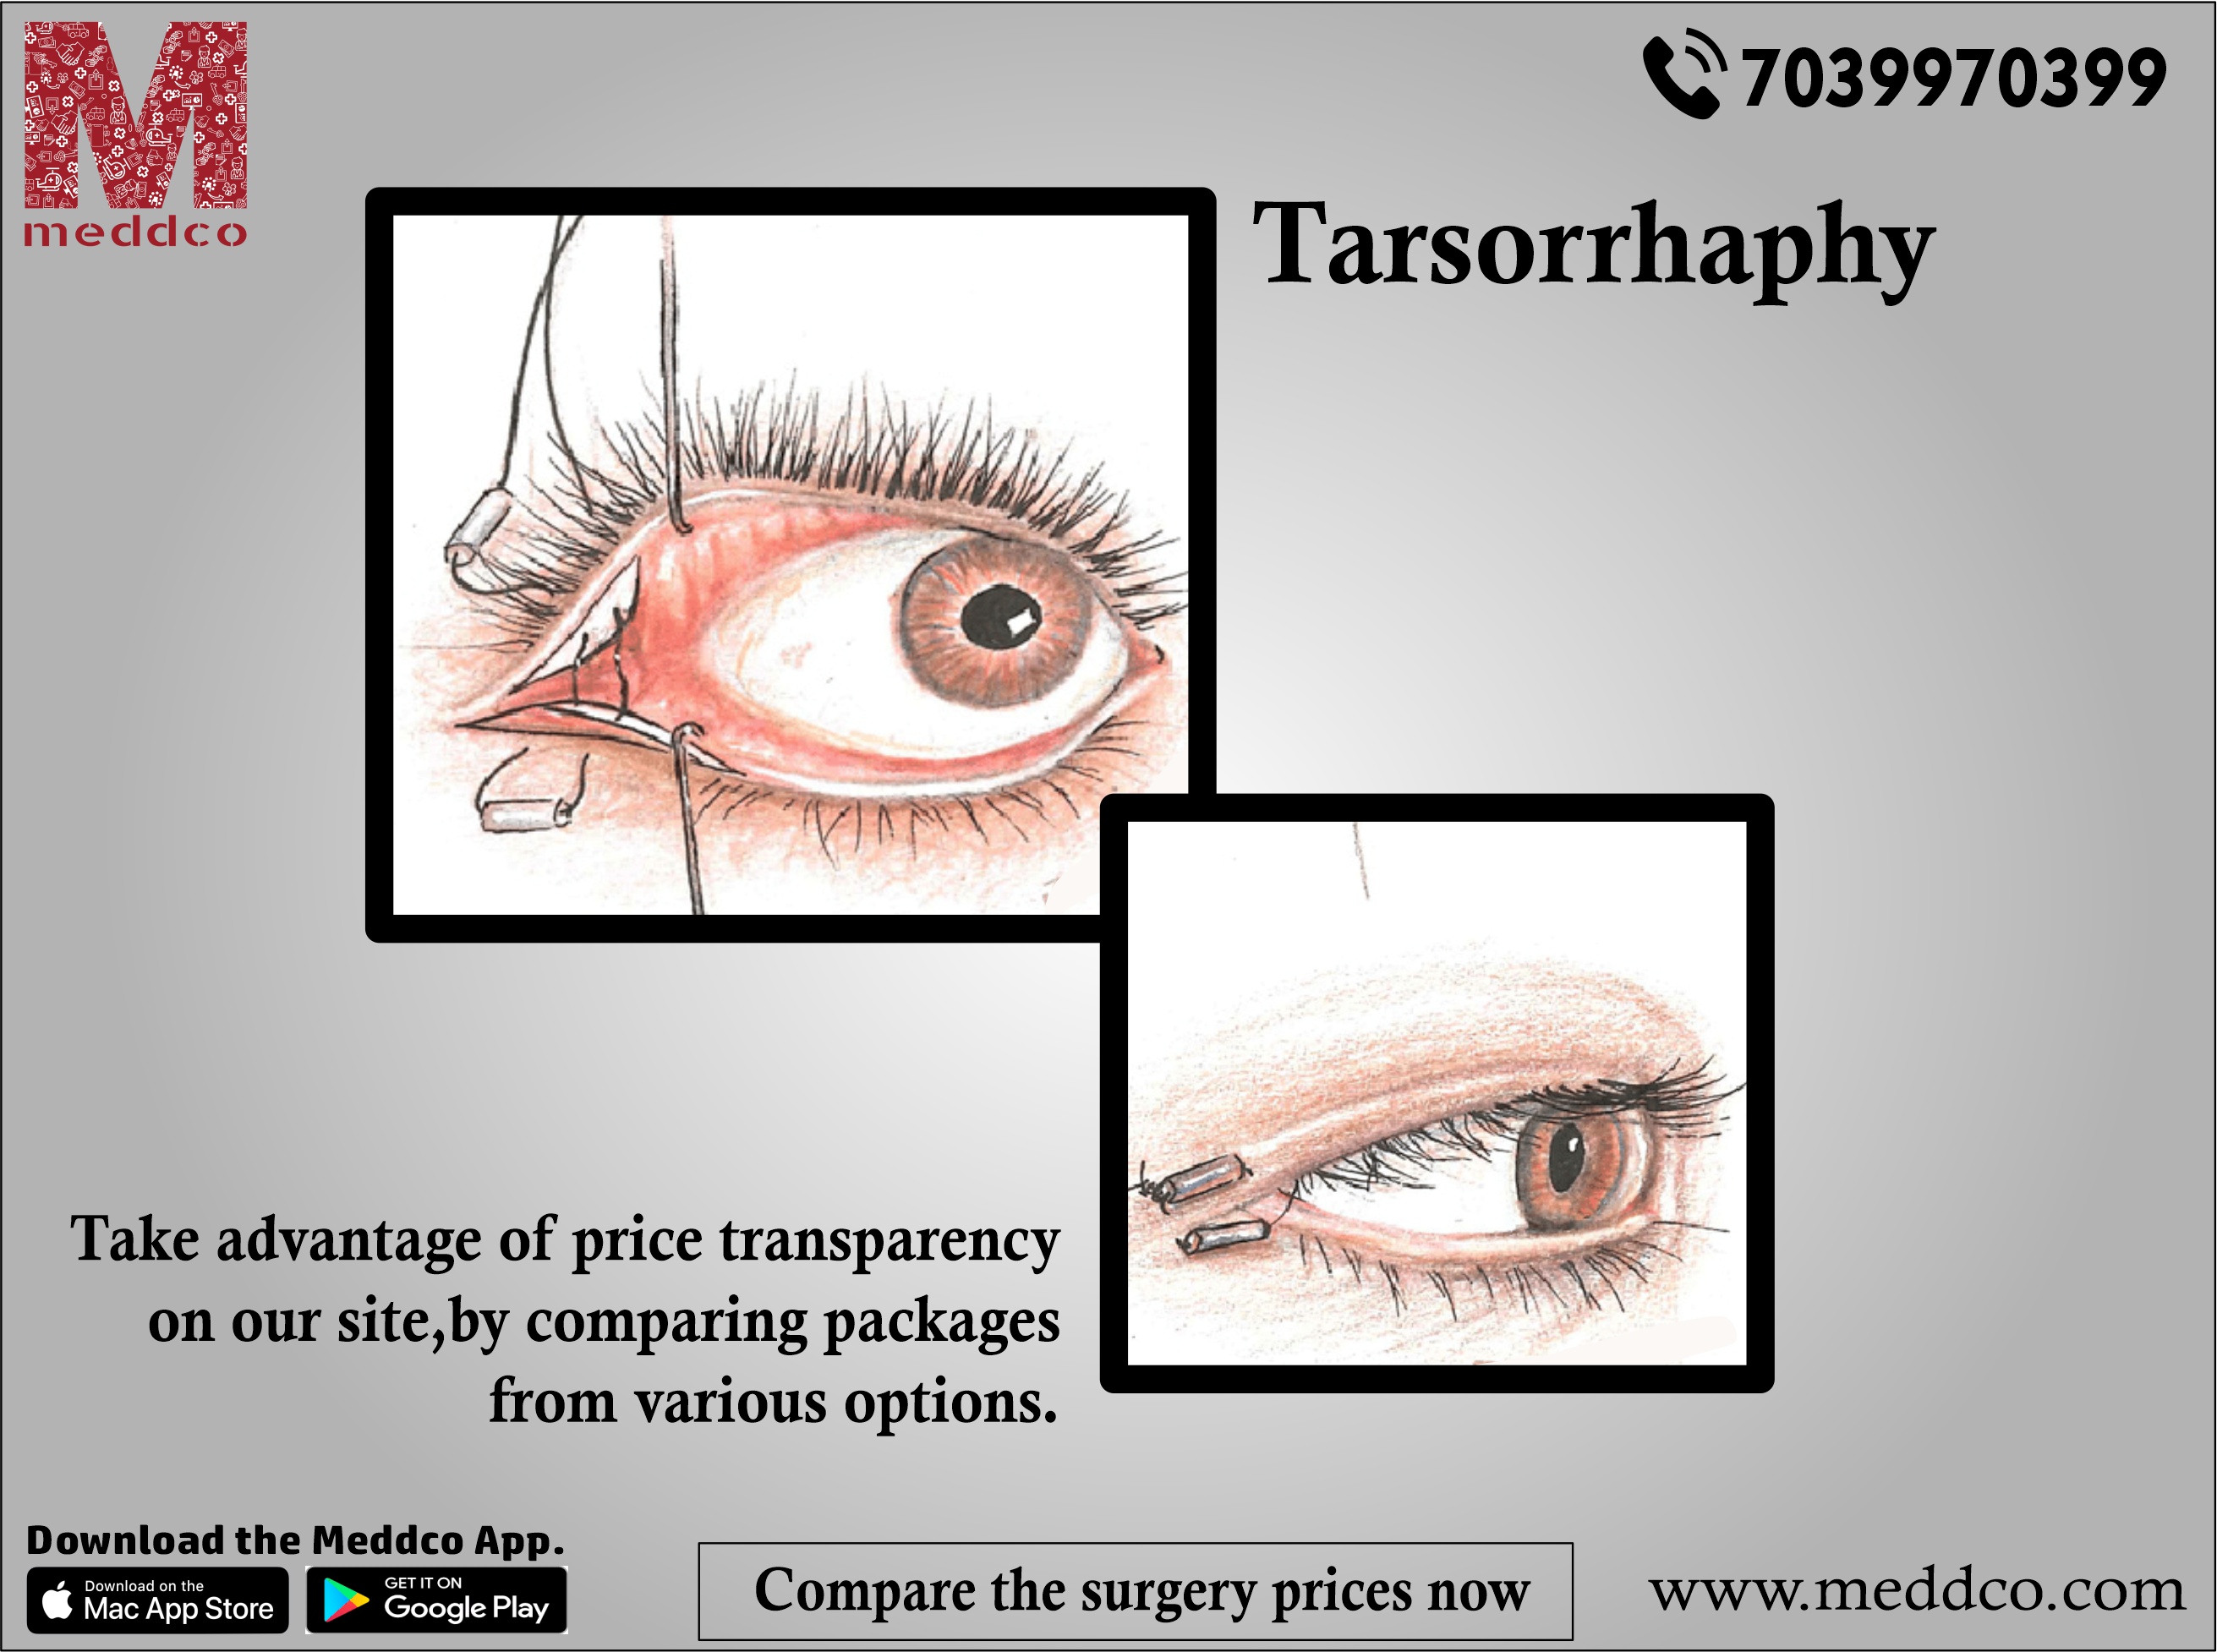 Everything you need to know about Tarsorrhaphy.